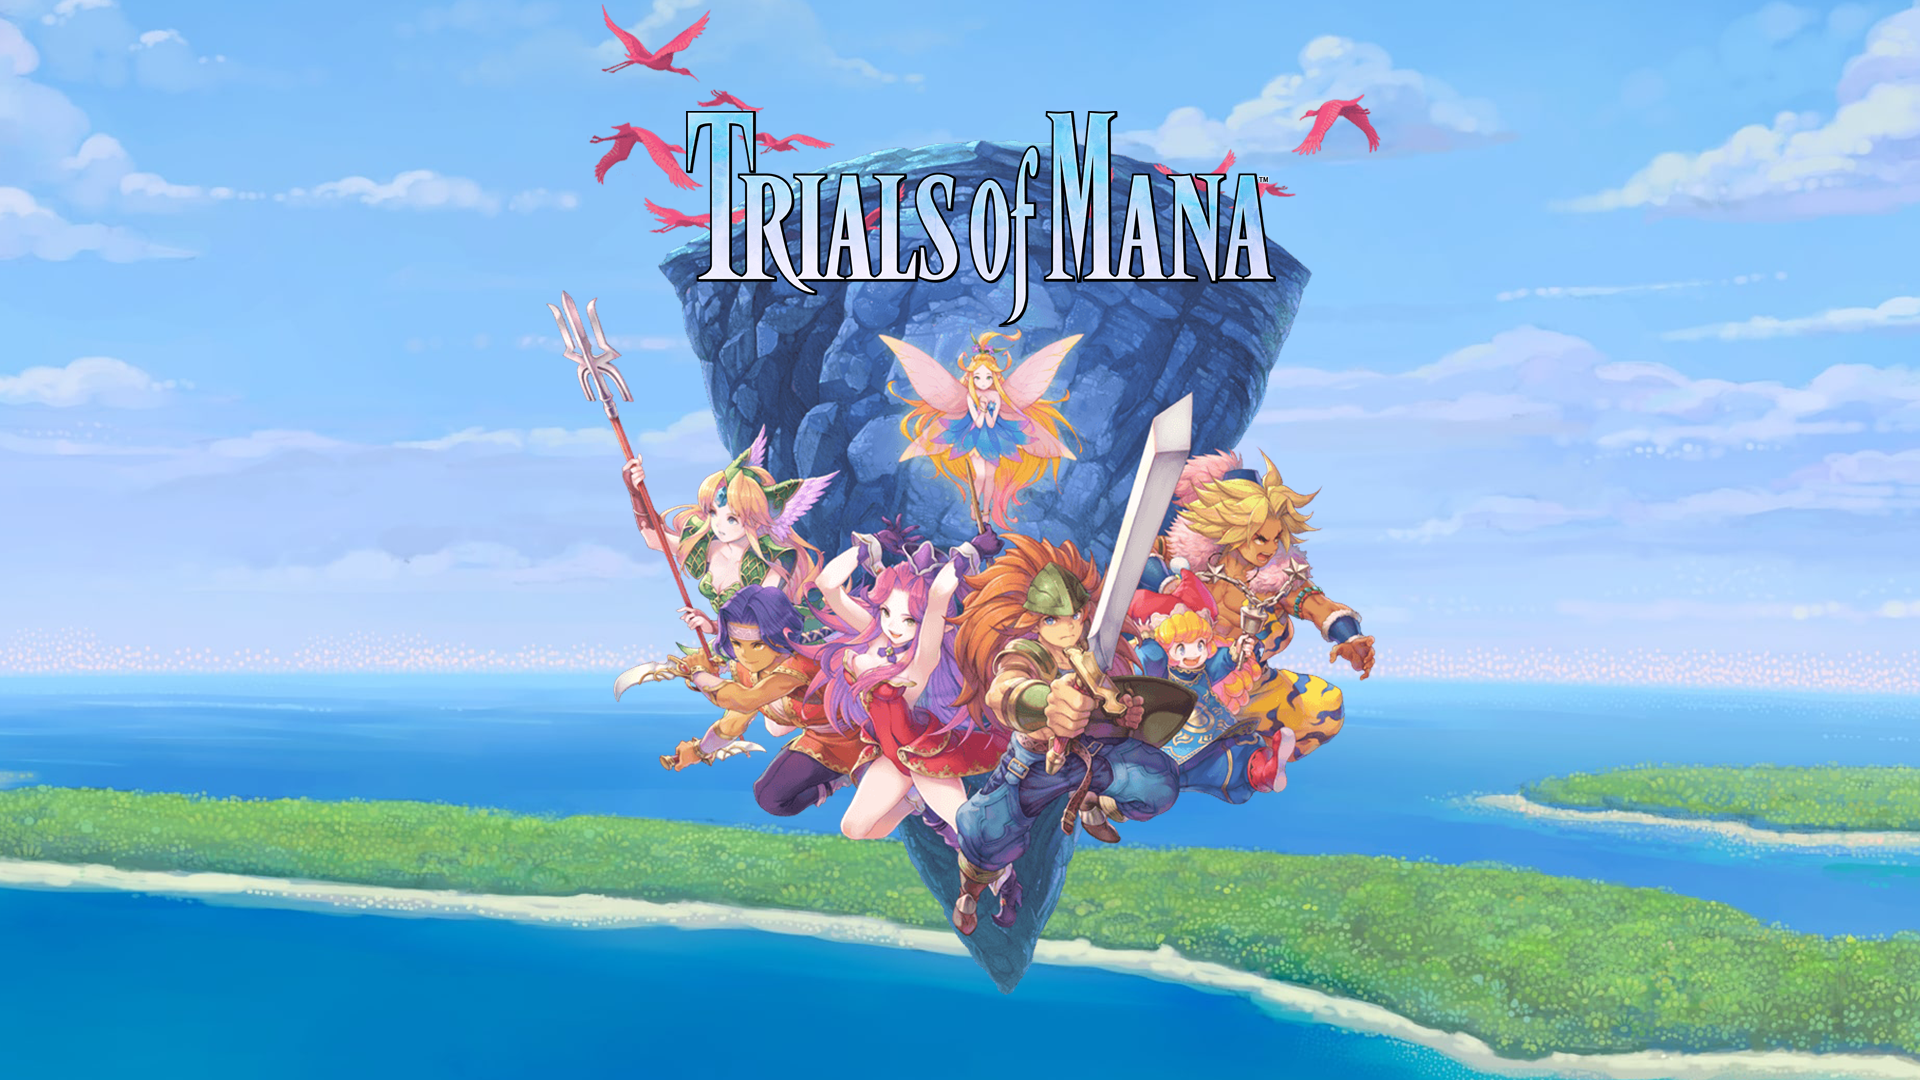 Trials of Mana gets a new gameplay trailer